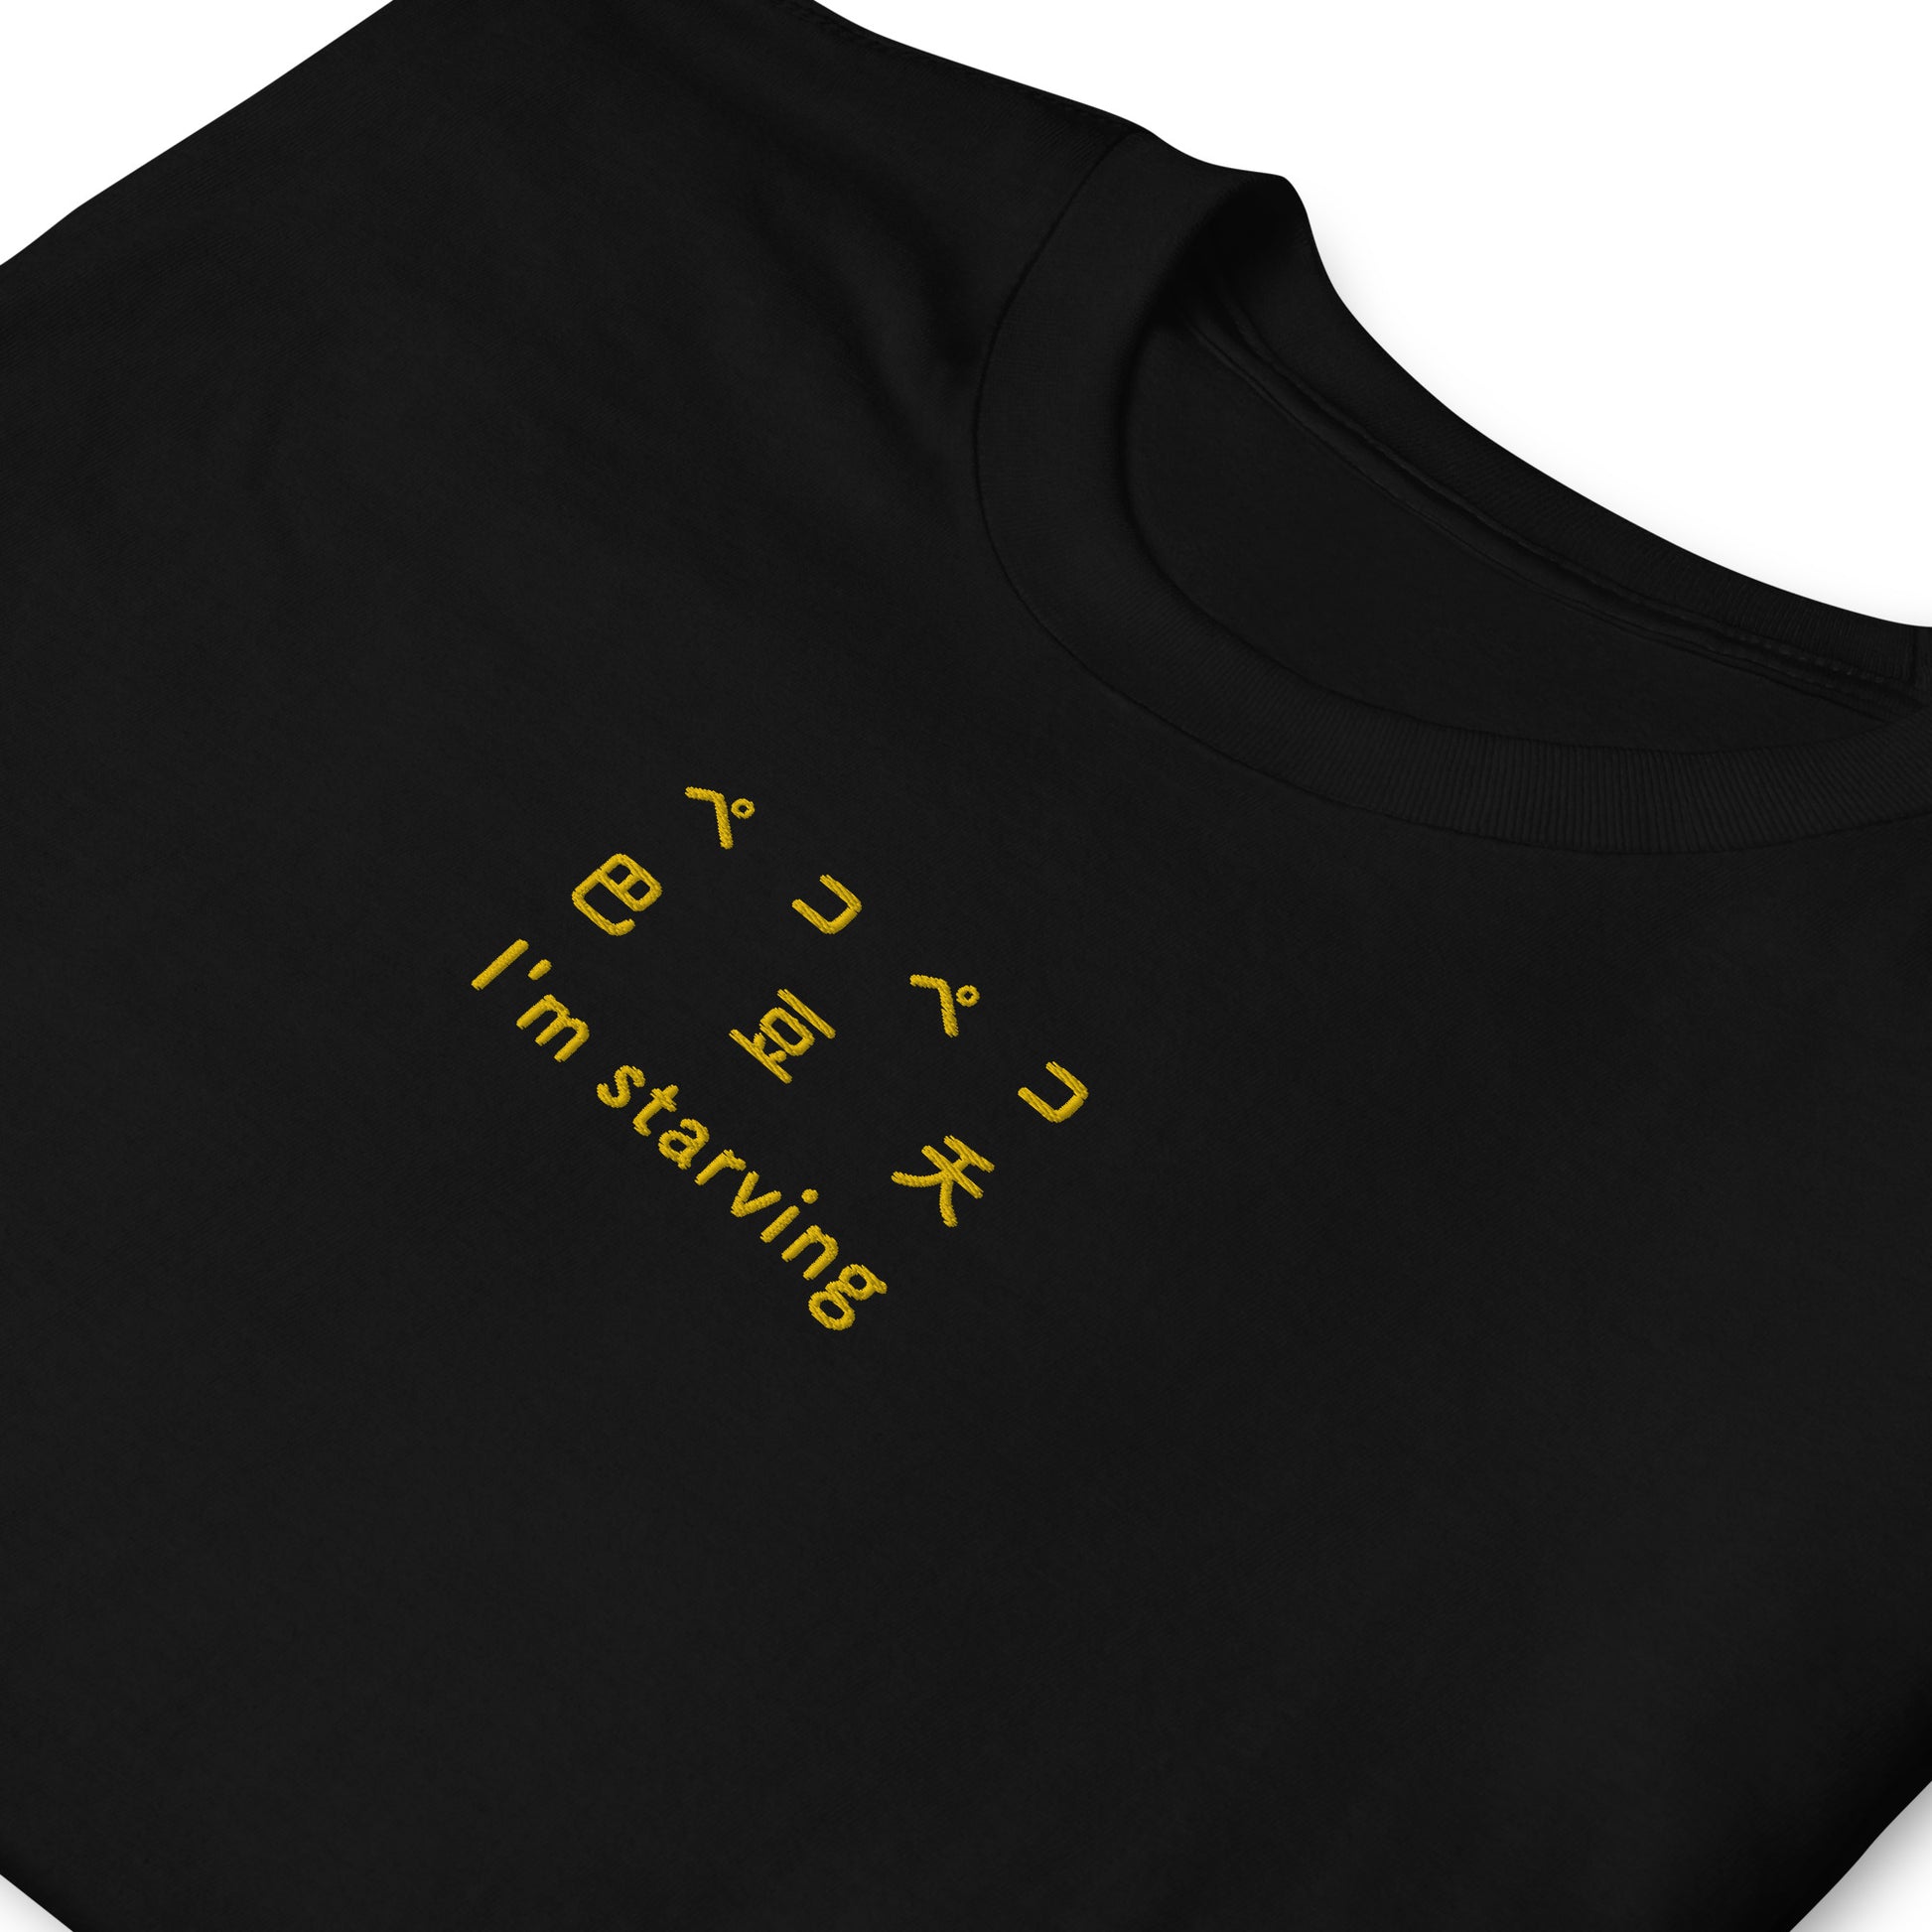 Black High Quality Tee - Front Design with an Yellow Embroidery "I'm Starving" in three languages